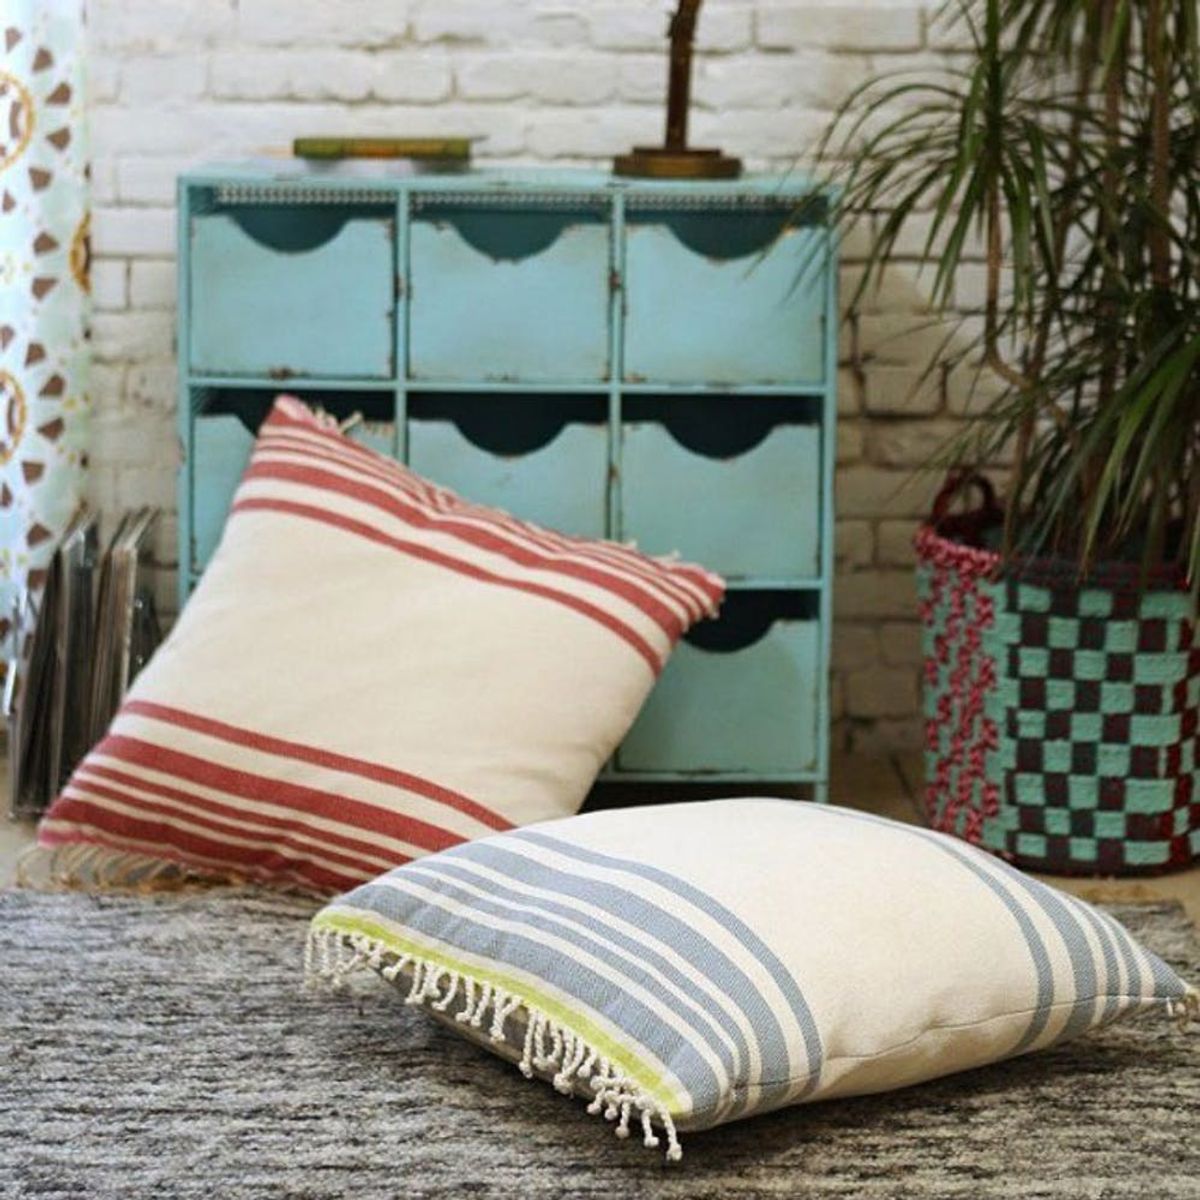 Stripes on Stripes on Stripes: Chic Home Accessories to Buy + DIY